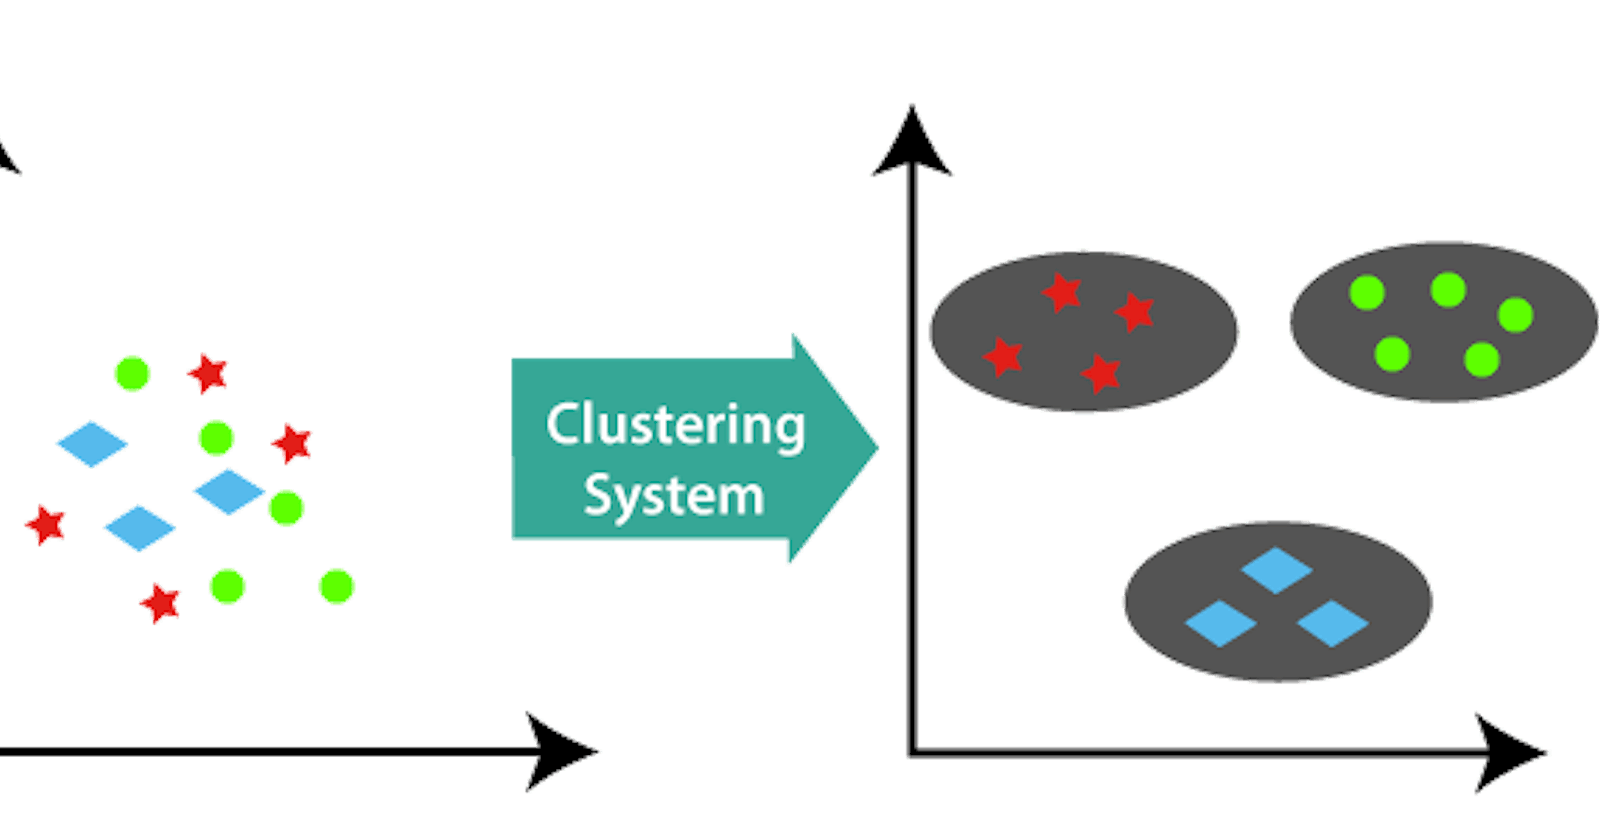 Unsupervised Learning: The Mathematics behind the K-Means Clustering Algorithm